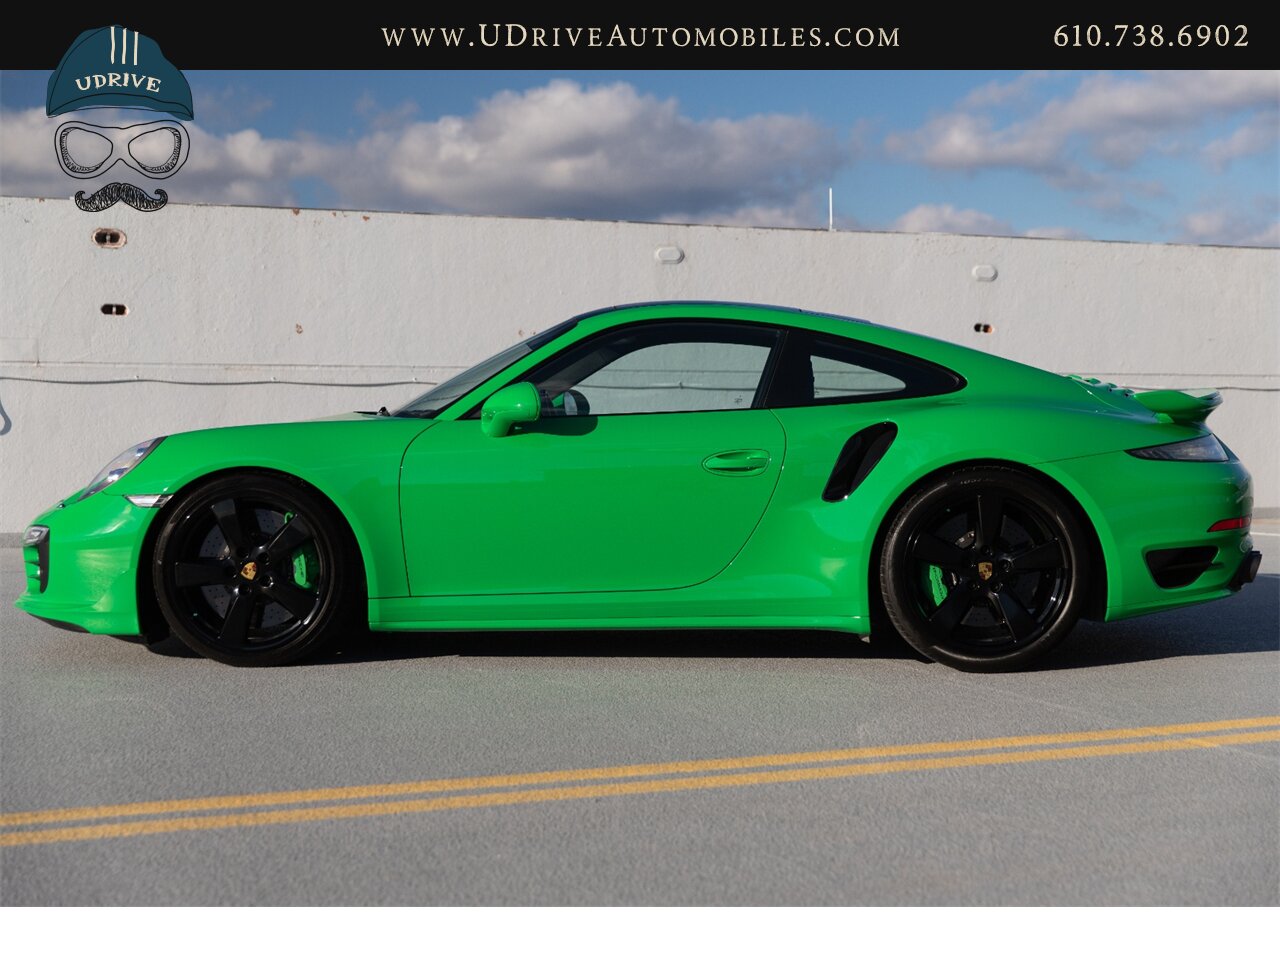 2016 Porsche 911 Turbo S PTS Viper Green Aerokit $203k MSRP  Painted Side Skirts Painted Grilles Wheels in Black - Photo 6 - West Chester, PA 19382